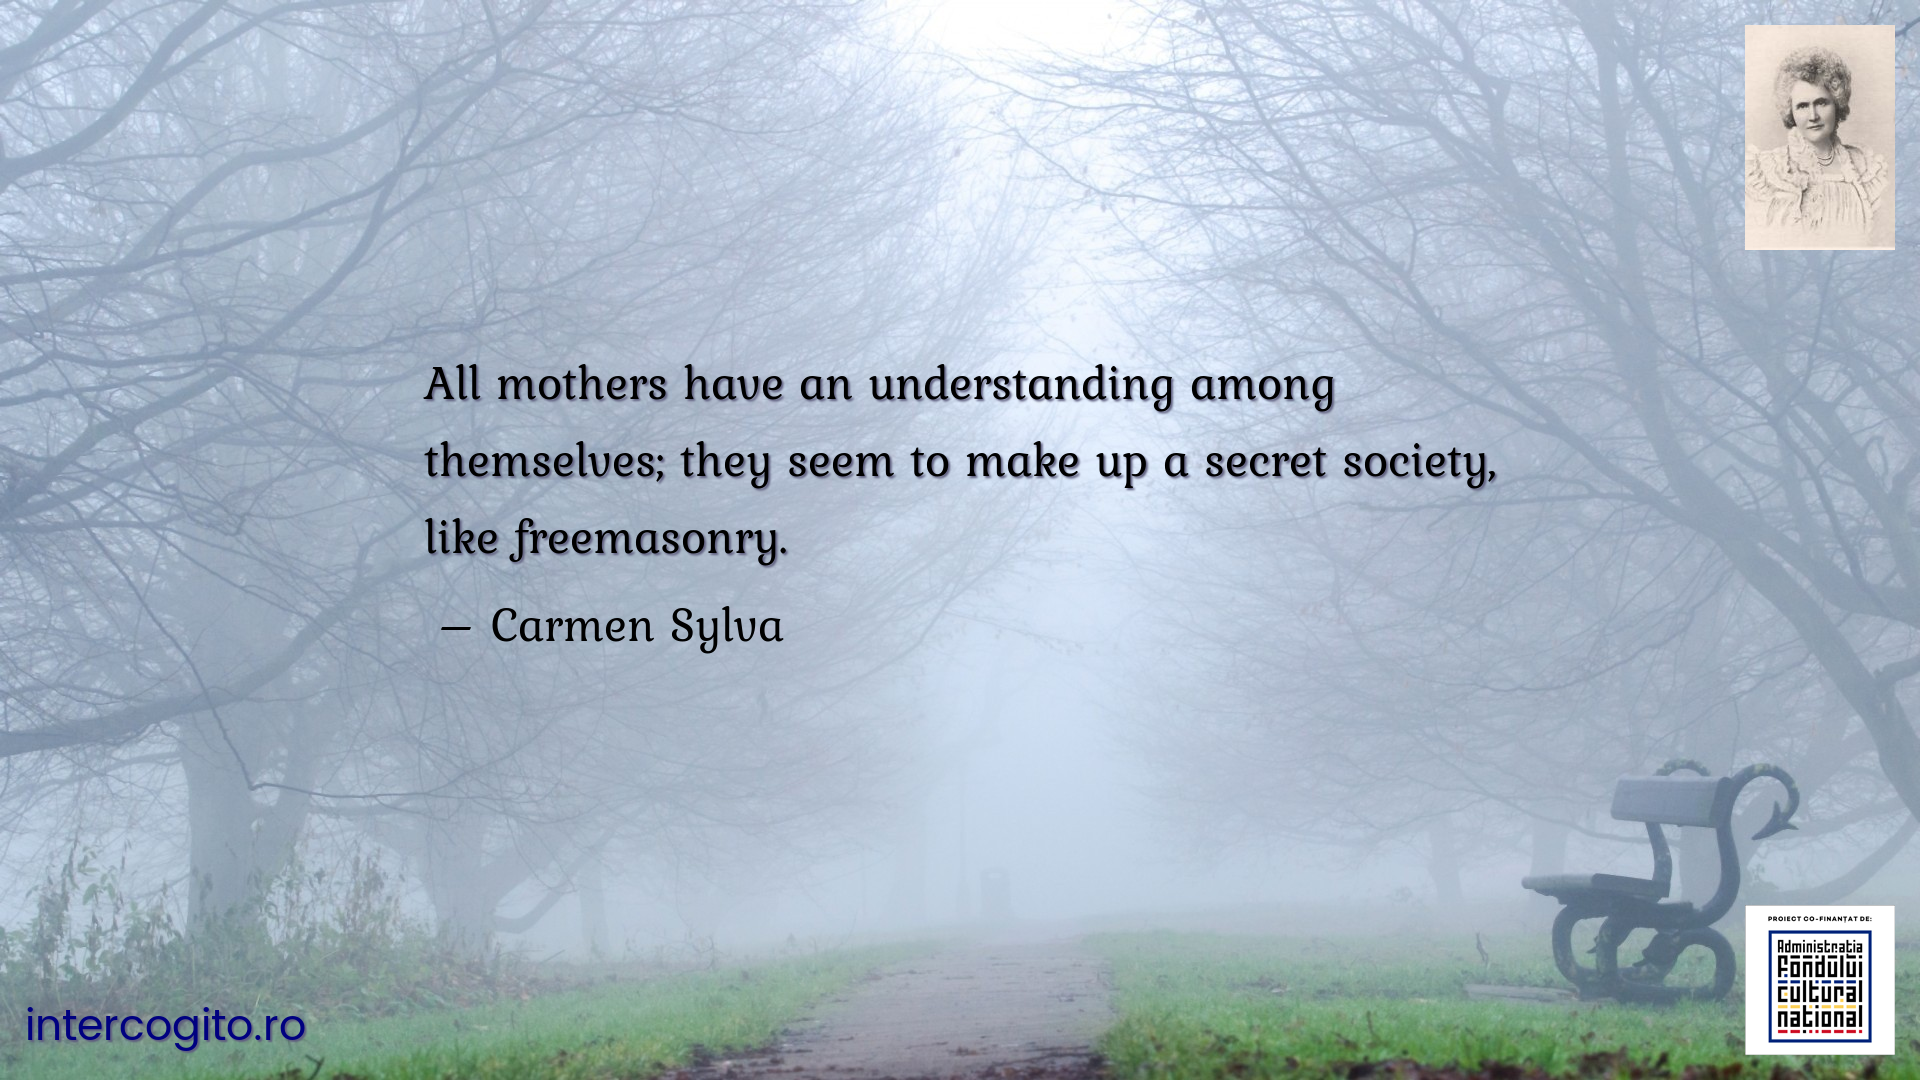 All mothers have an understanding among themselves; they seem to make up a secret society, like freemasonry.